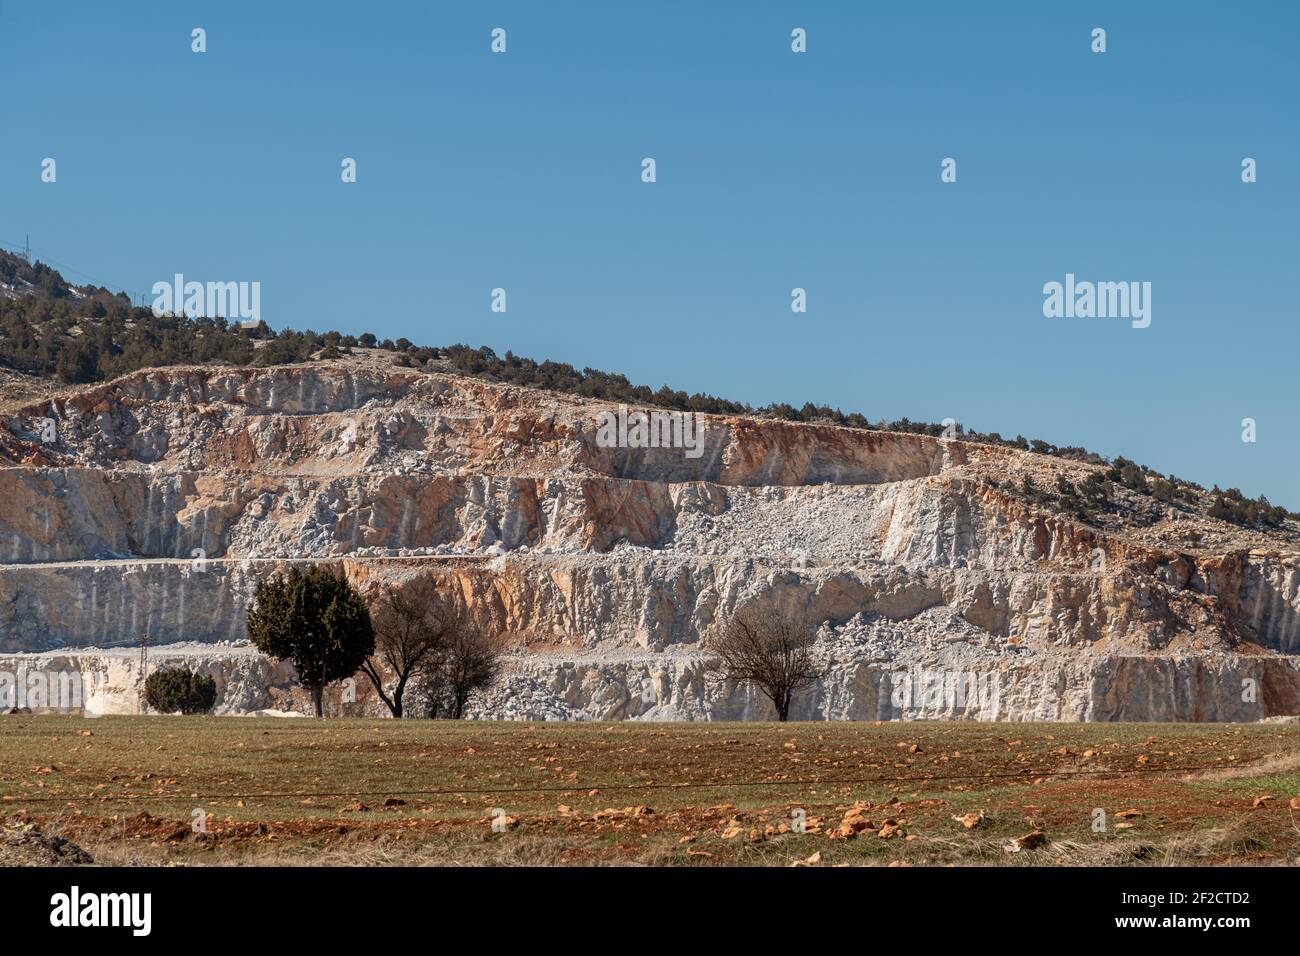 Rock quarry mining for gravel and limestone with blast marks showing on the sides of steep walls Stock Photo